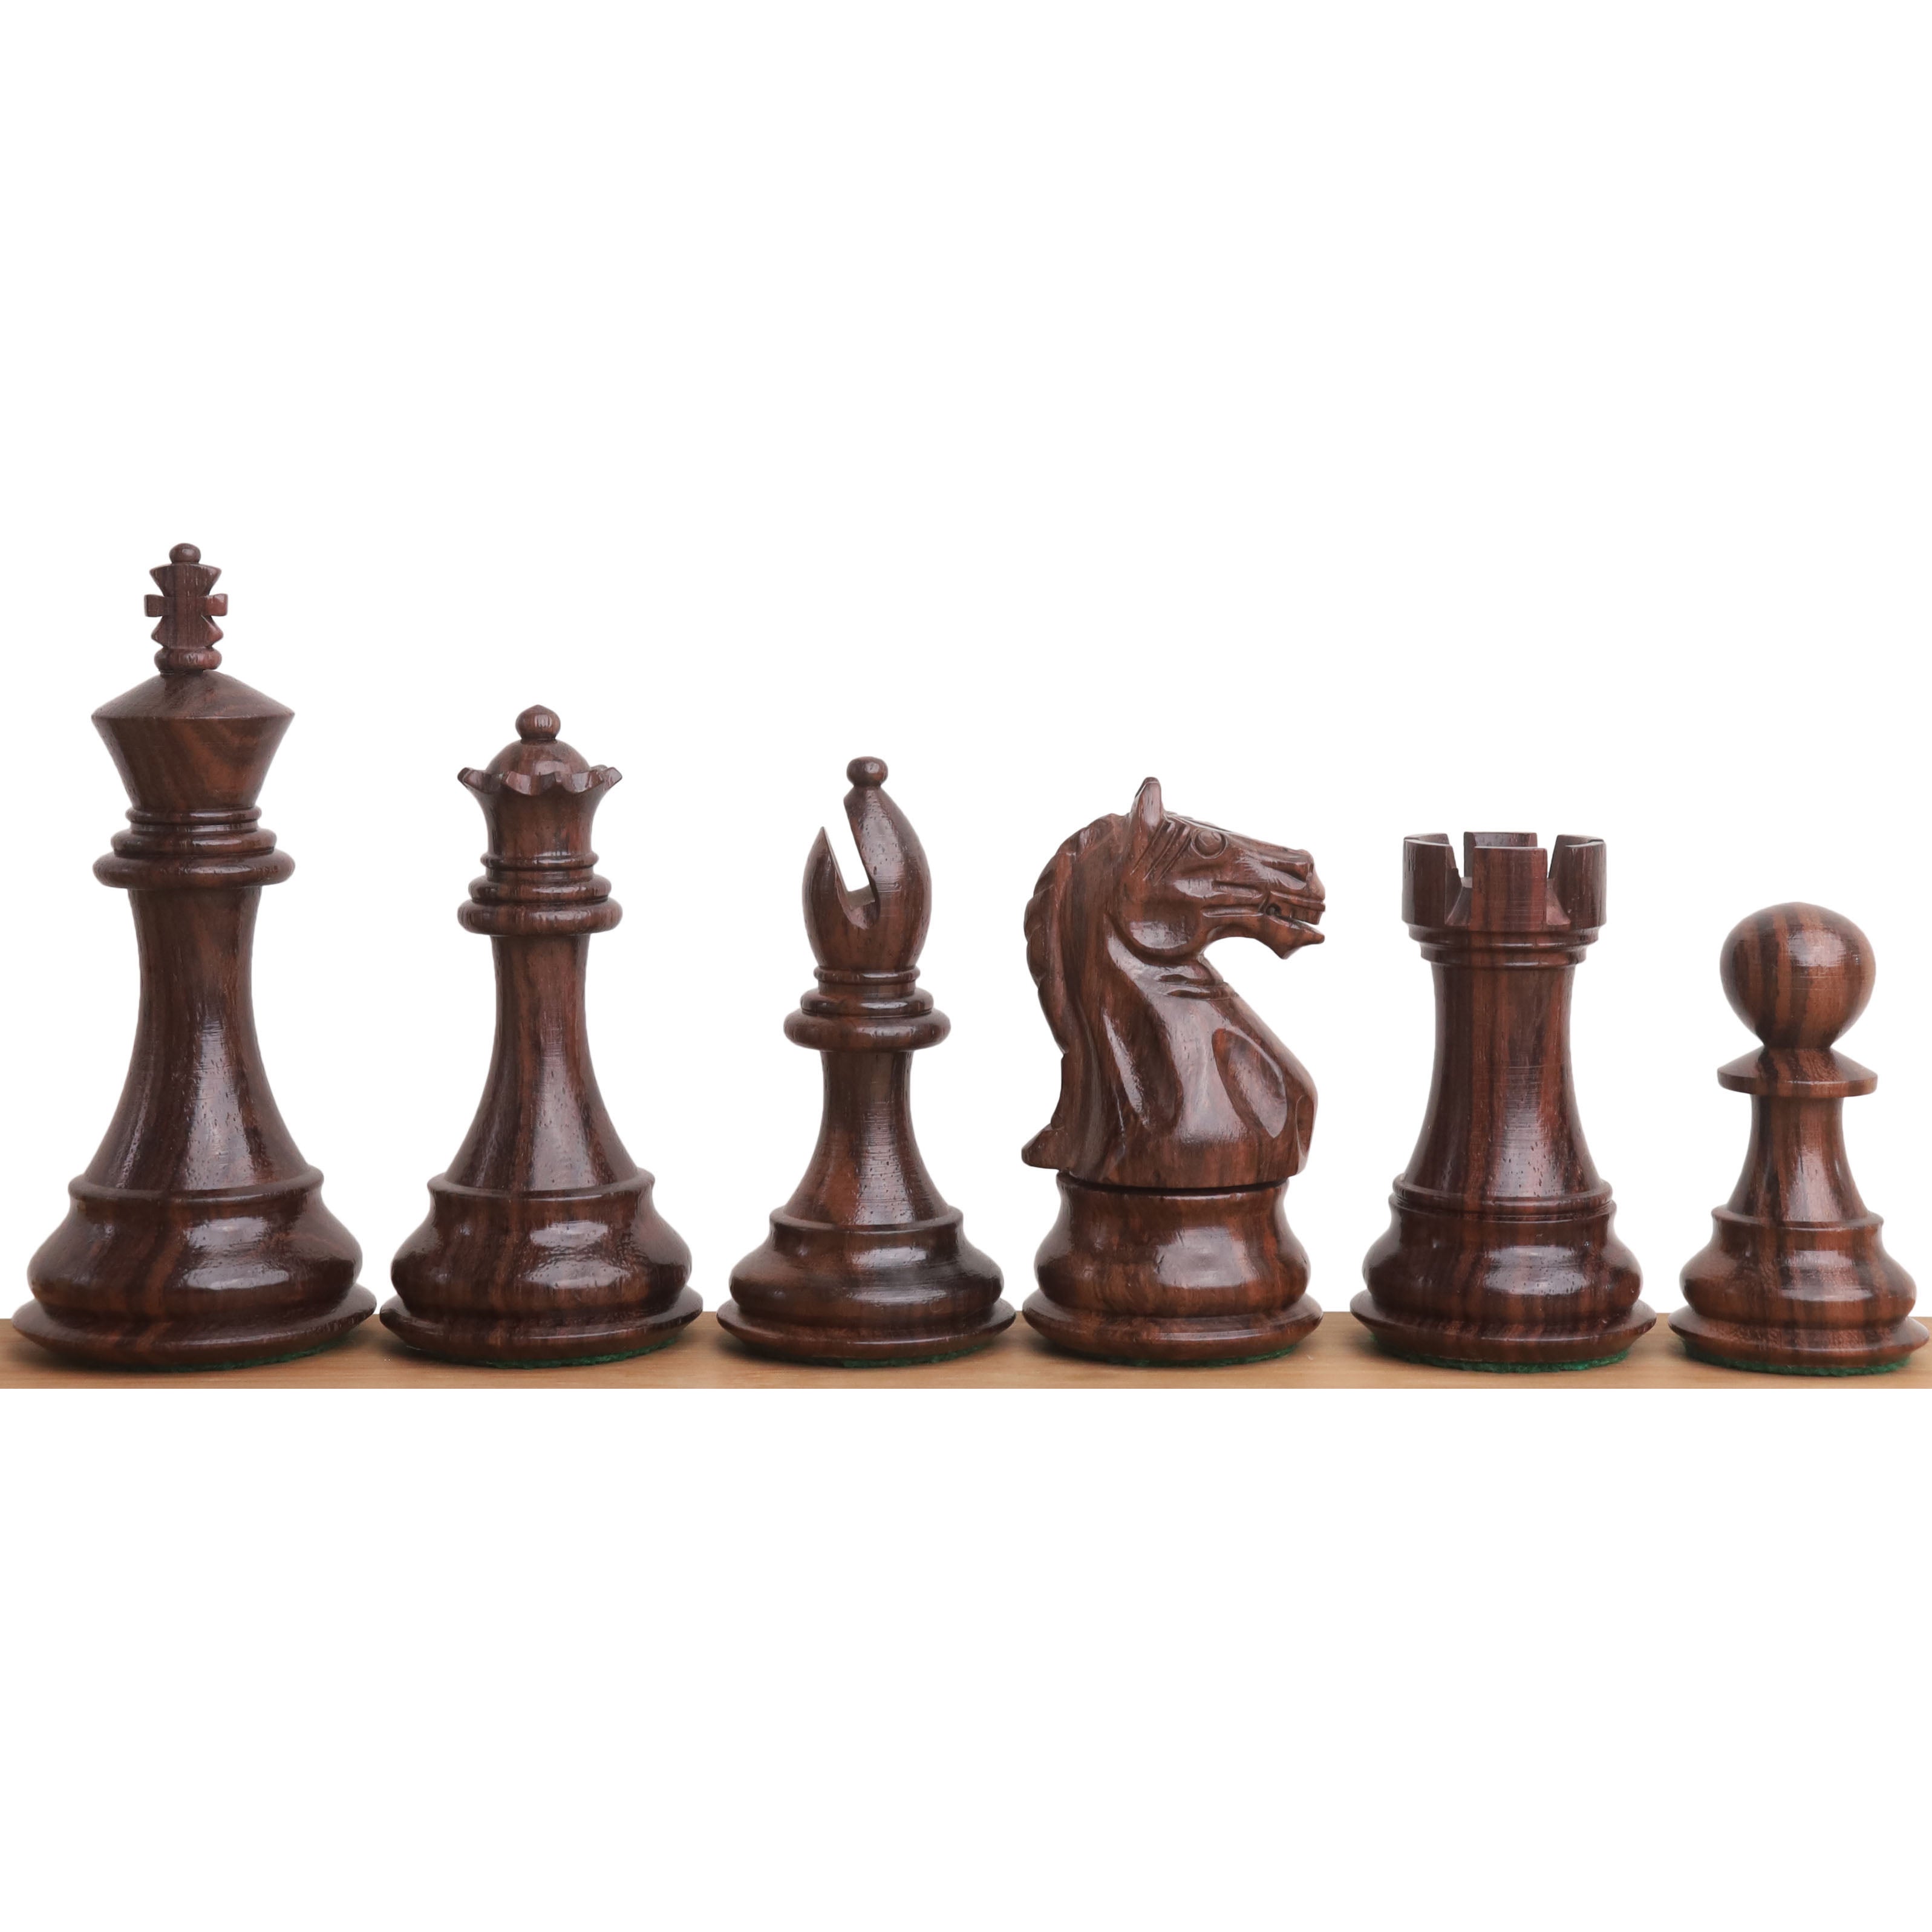 Combo of 4" Fierce Knight Staunton Chess Set - Pieces in Rosewood With Board and Box